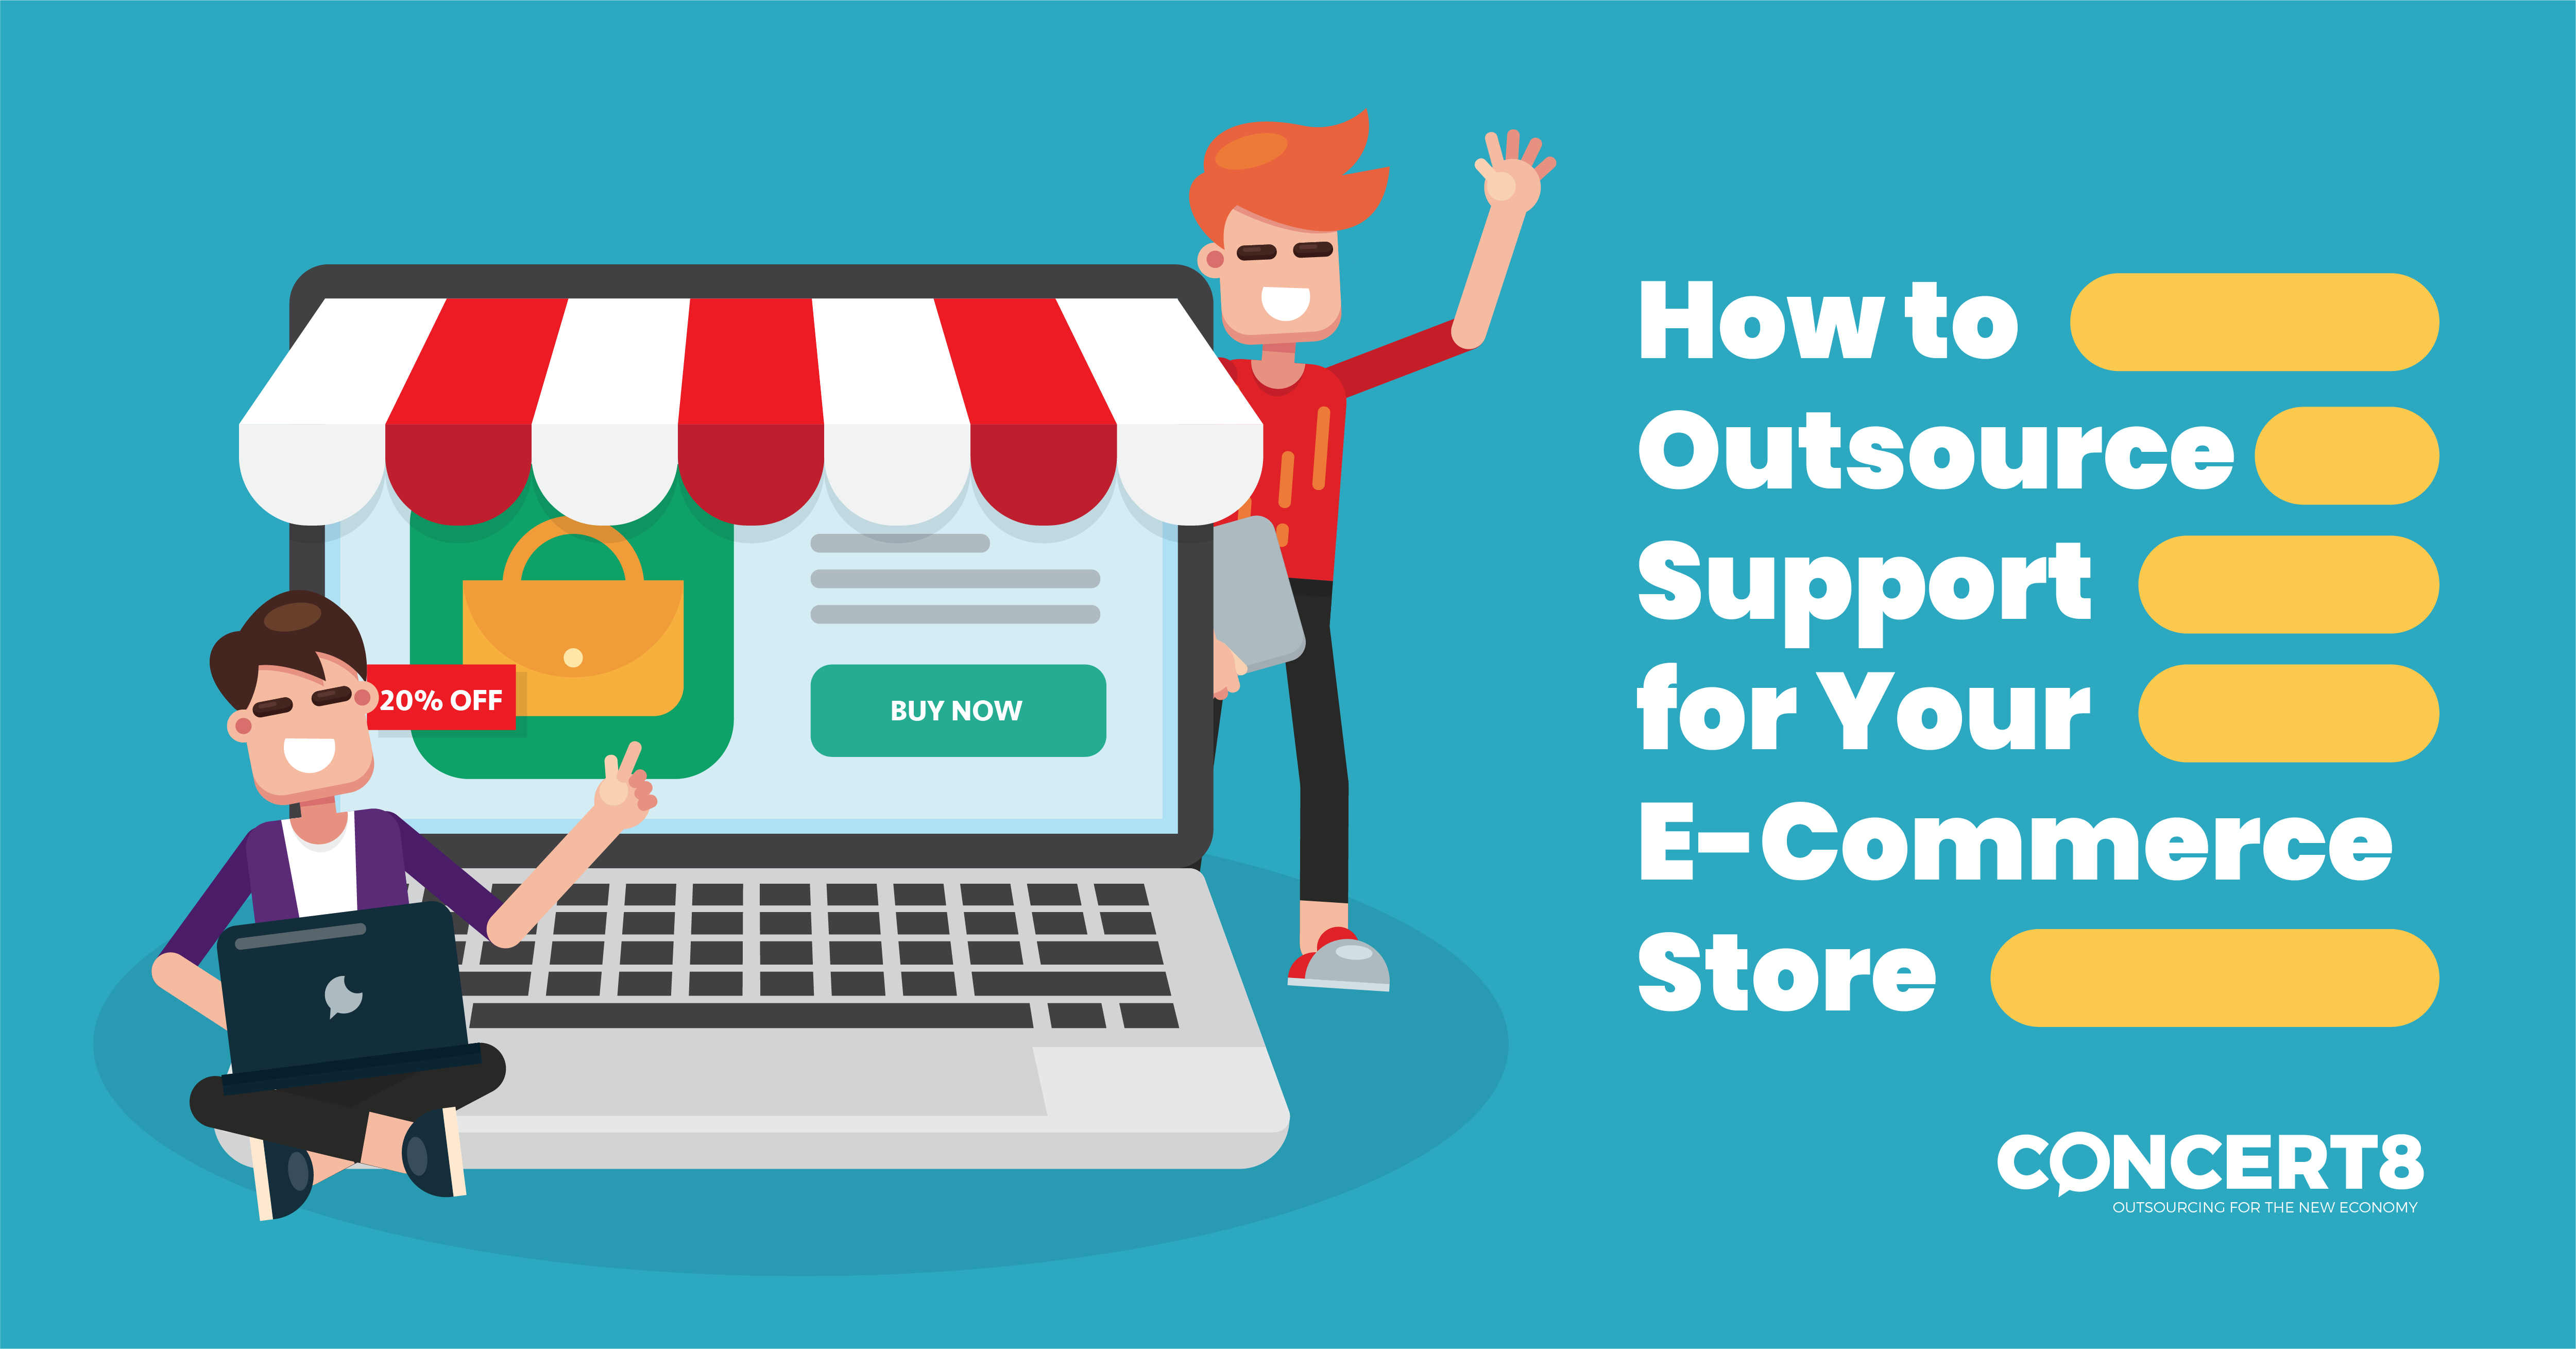 How to Ourtsource Support for Your E-Commerce Store